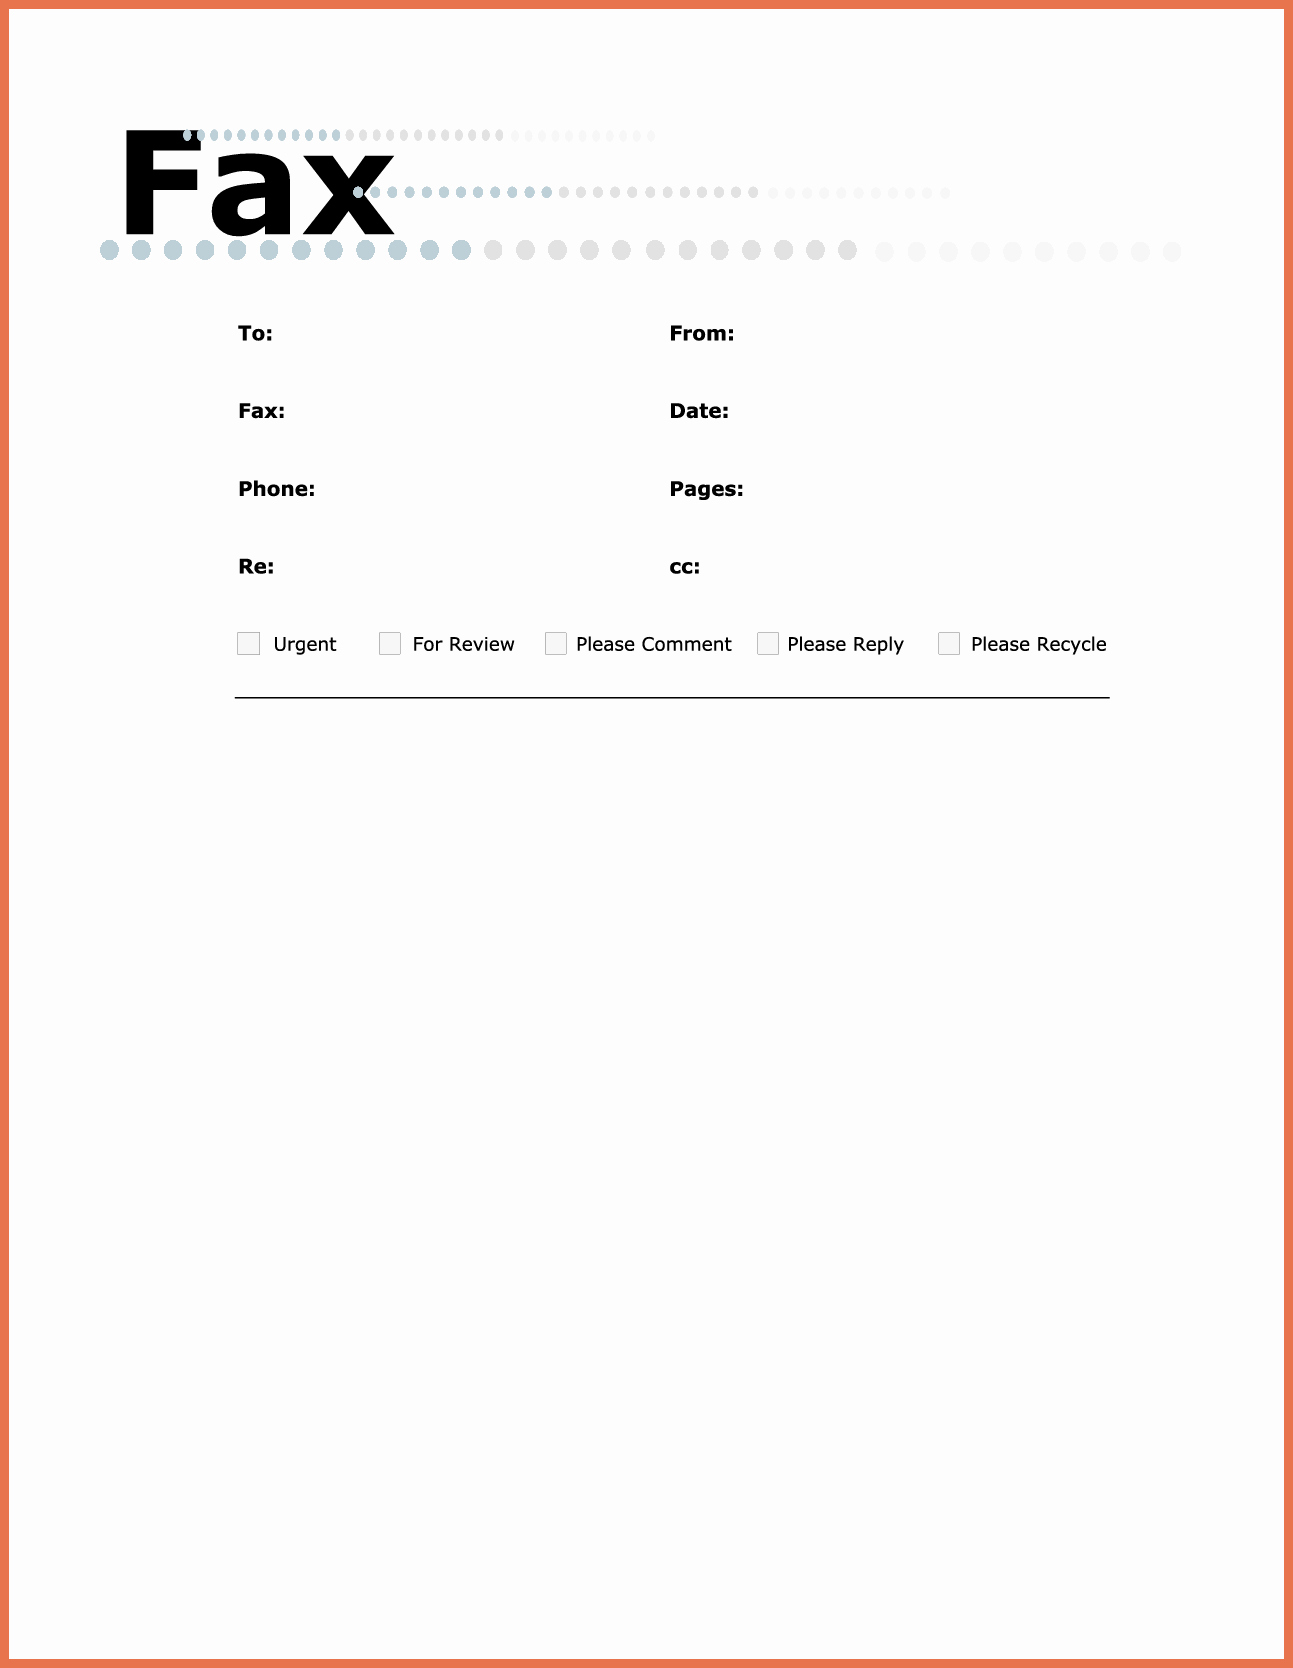 Fax Cover Sheets Microsoft Word Lovely Fax Cover Word Portablegasgrillweber